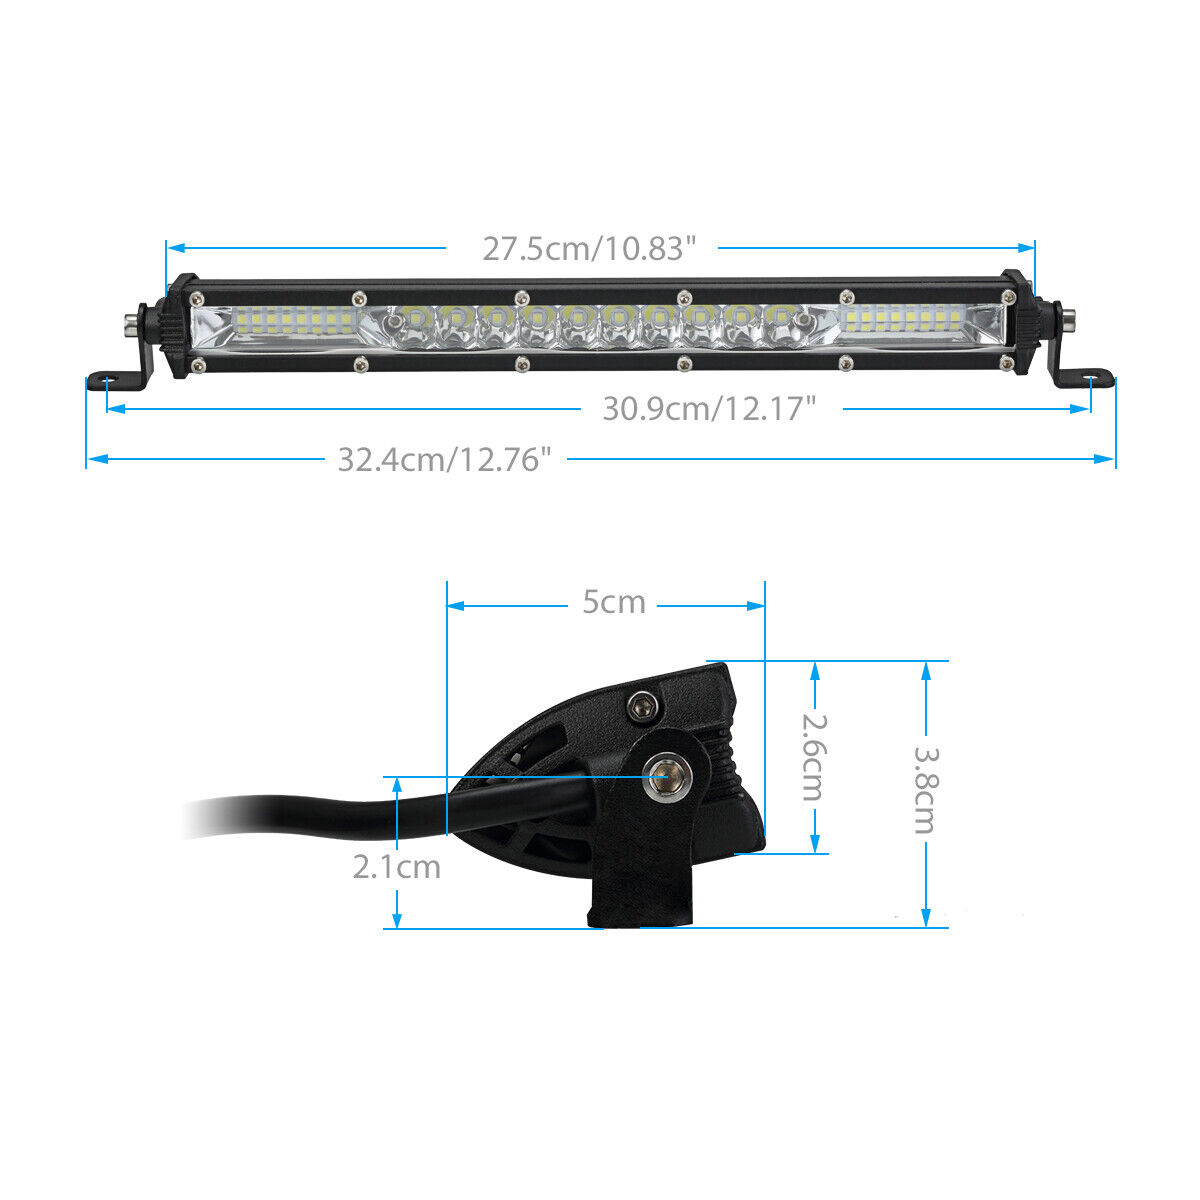 2x 12" inch 450W LED Work Light Bar Combo Spot Flood Driving Off Road SUV Boat Unbranded Does Not Apply - фотография #3